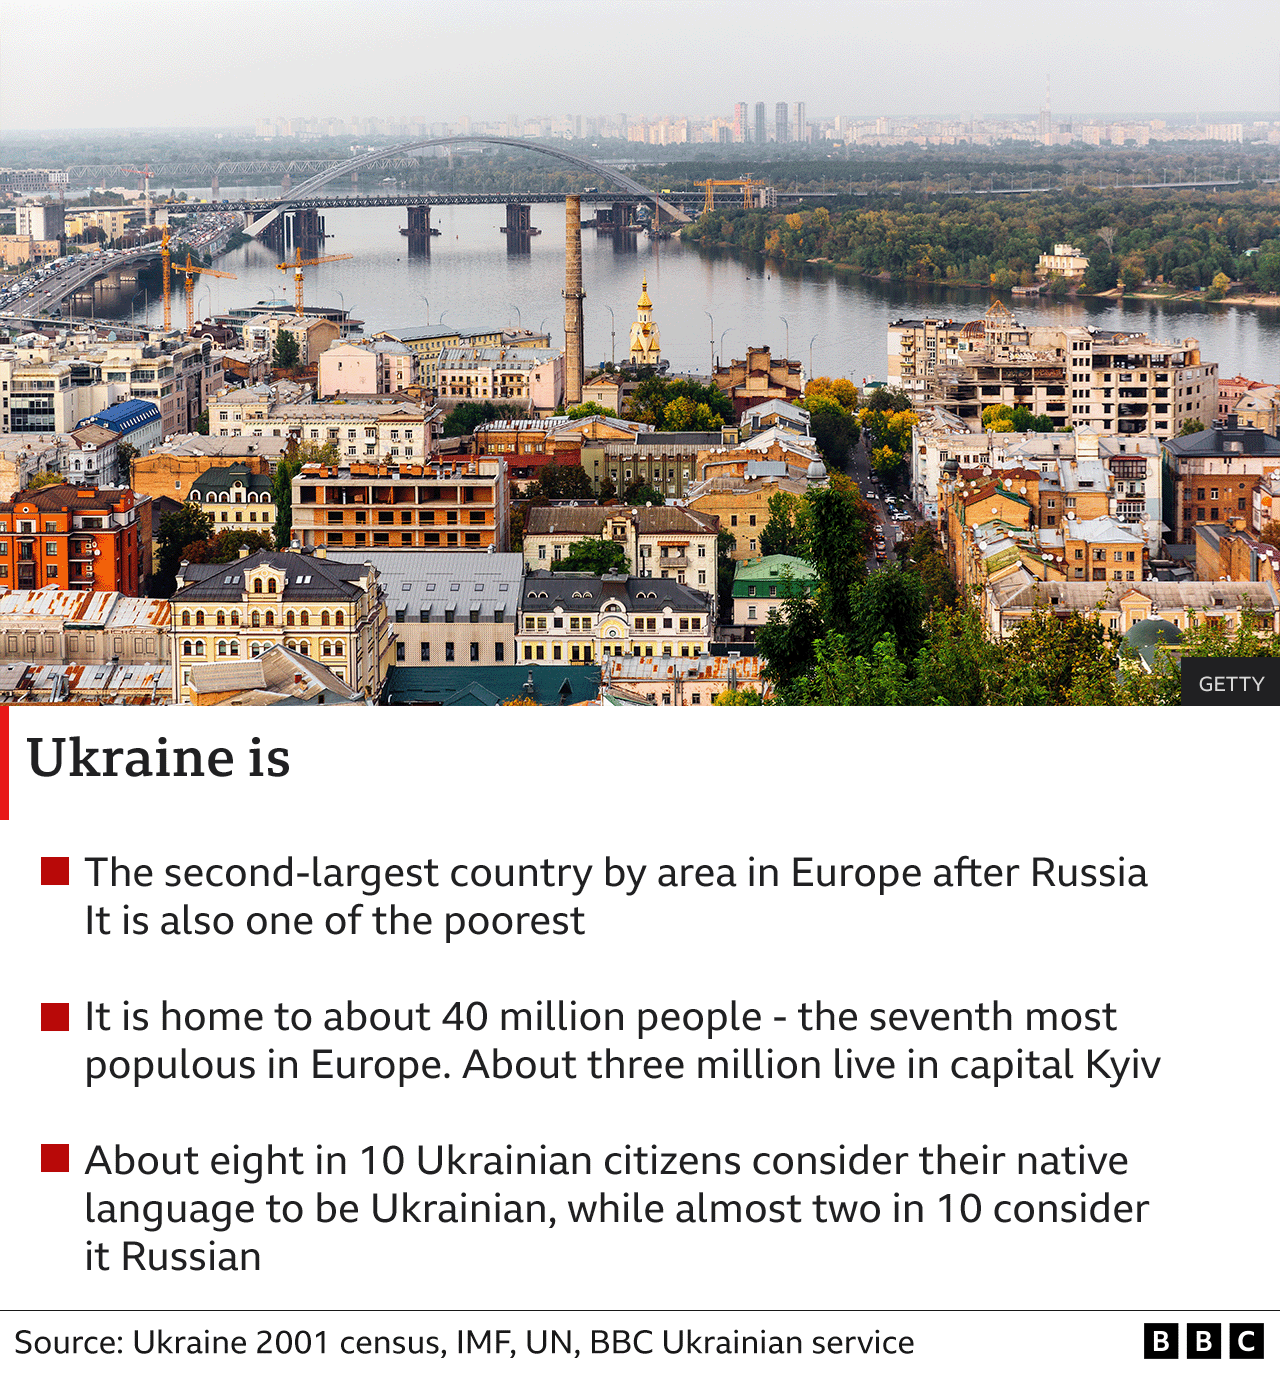 Image and text: Ukraine is… the second-largest country by area in Europe after Russia; It is also one of the poorest; it is home to about 40 million people - the seventh most populous in Europe. Around three million live in capital Kyiv; About eight in 10 Ukrainian citizens consider their native language to be Ukrainian, while almost two in 10 consider it Russian